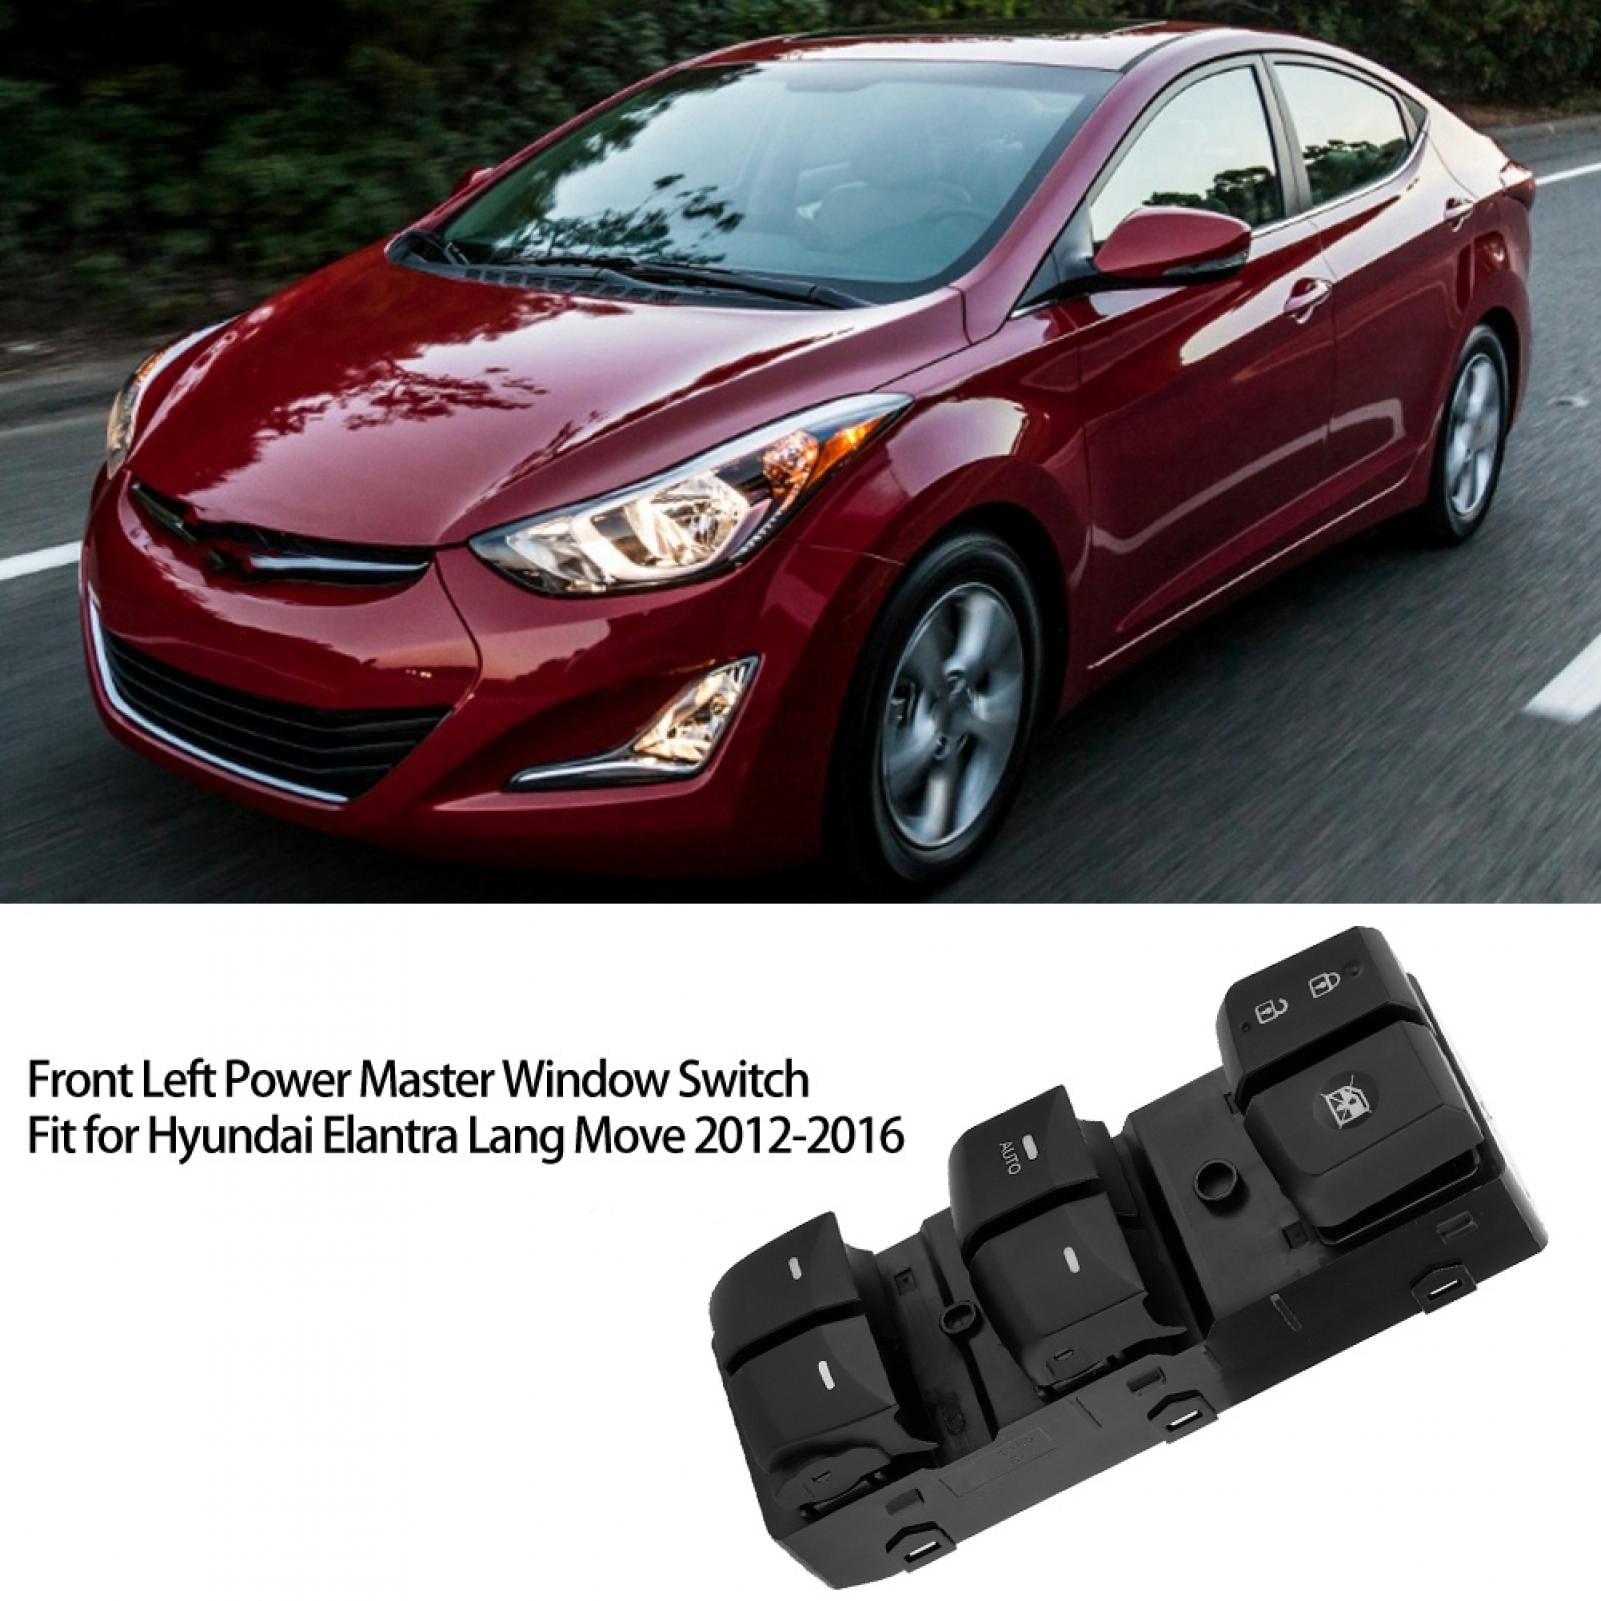 Perfect Match Window Power Switch Front for Hyundai Elantra 2012-2016 Lang Move